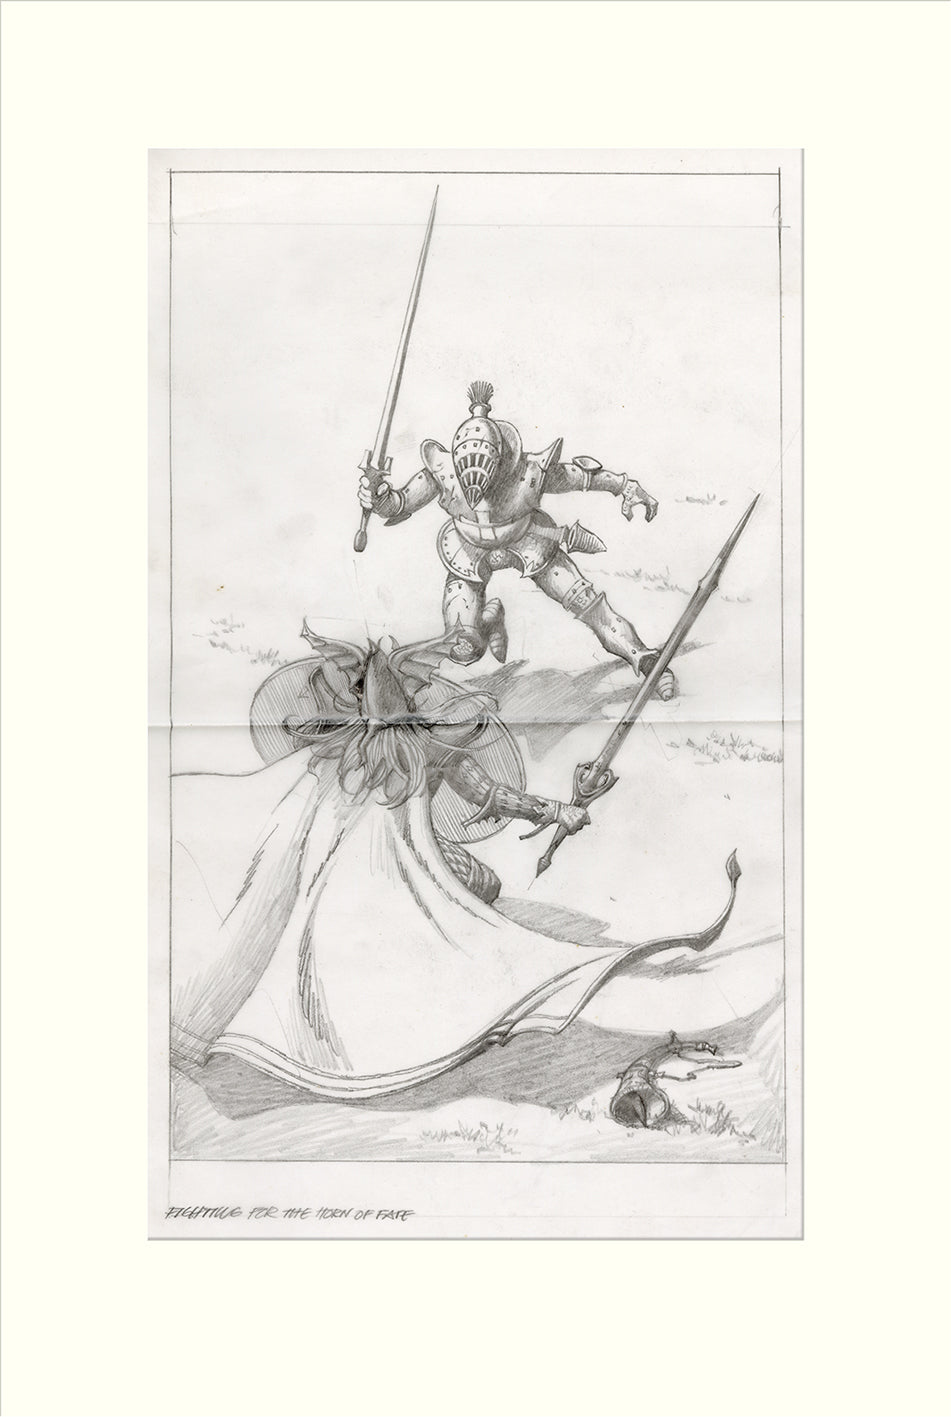 Elric Fighting for the Horn of Fate pencil drawing by Rodney Matthews